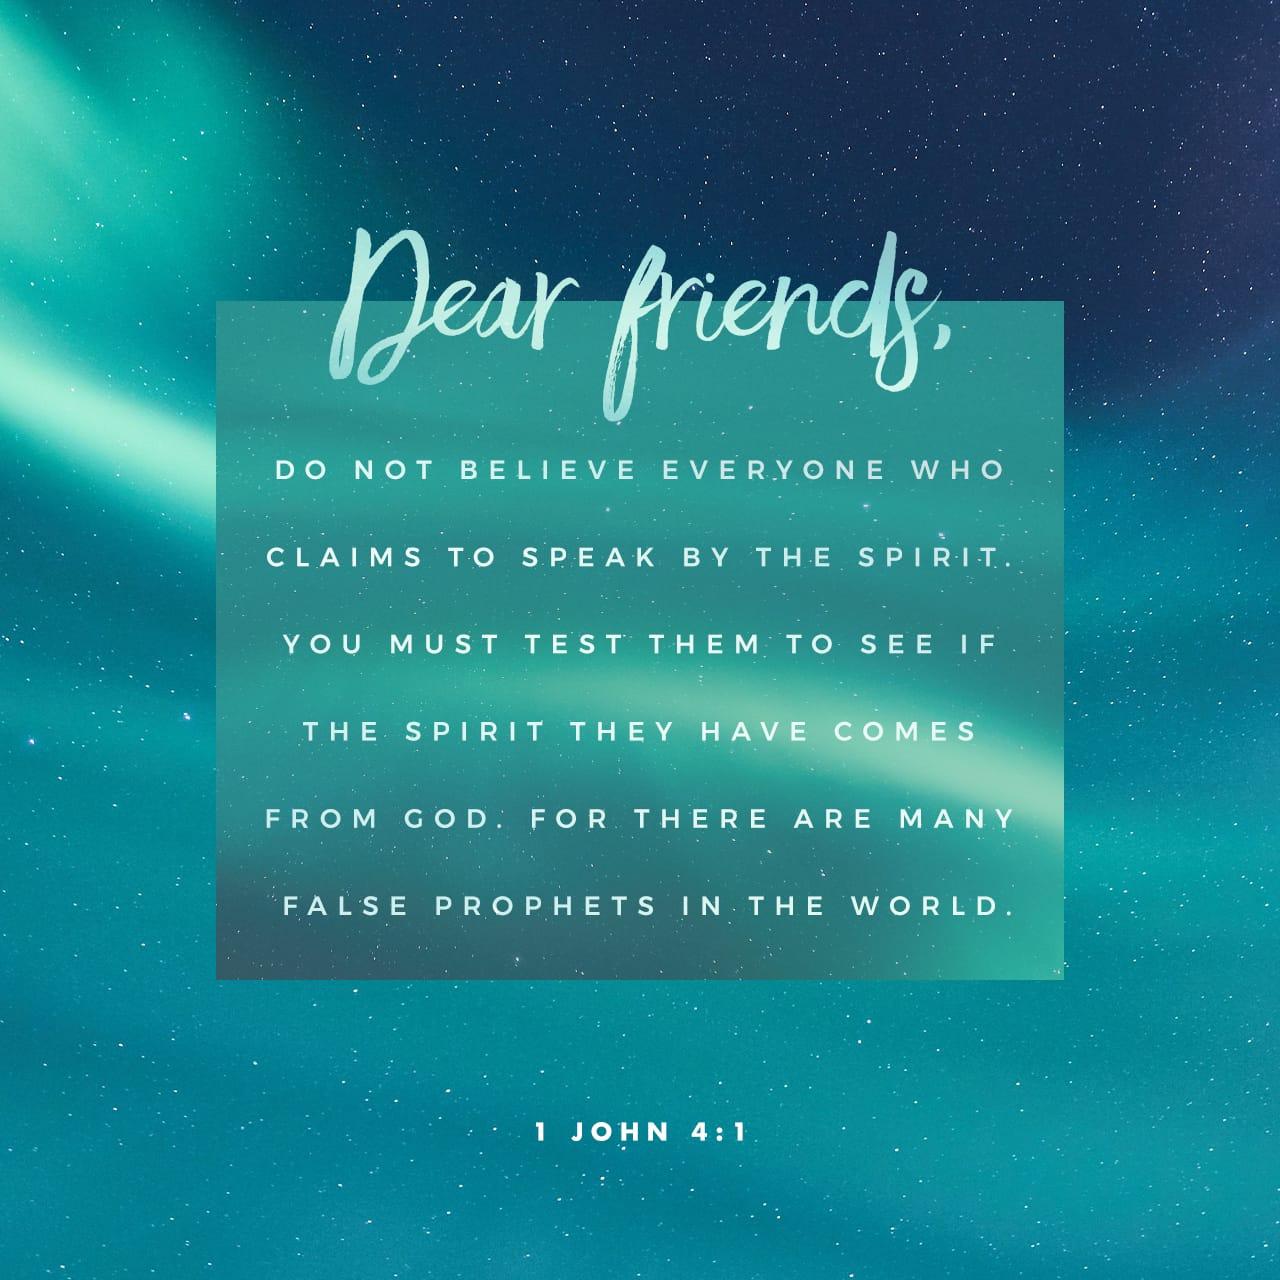 Bible Verse of the Day - day 84 - image 6031 (1 John 4:1)